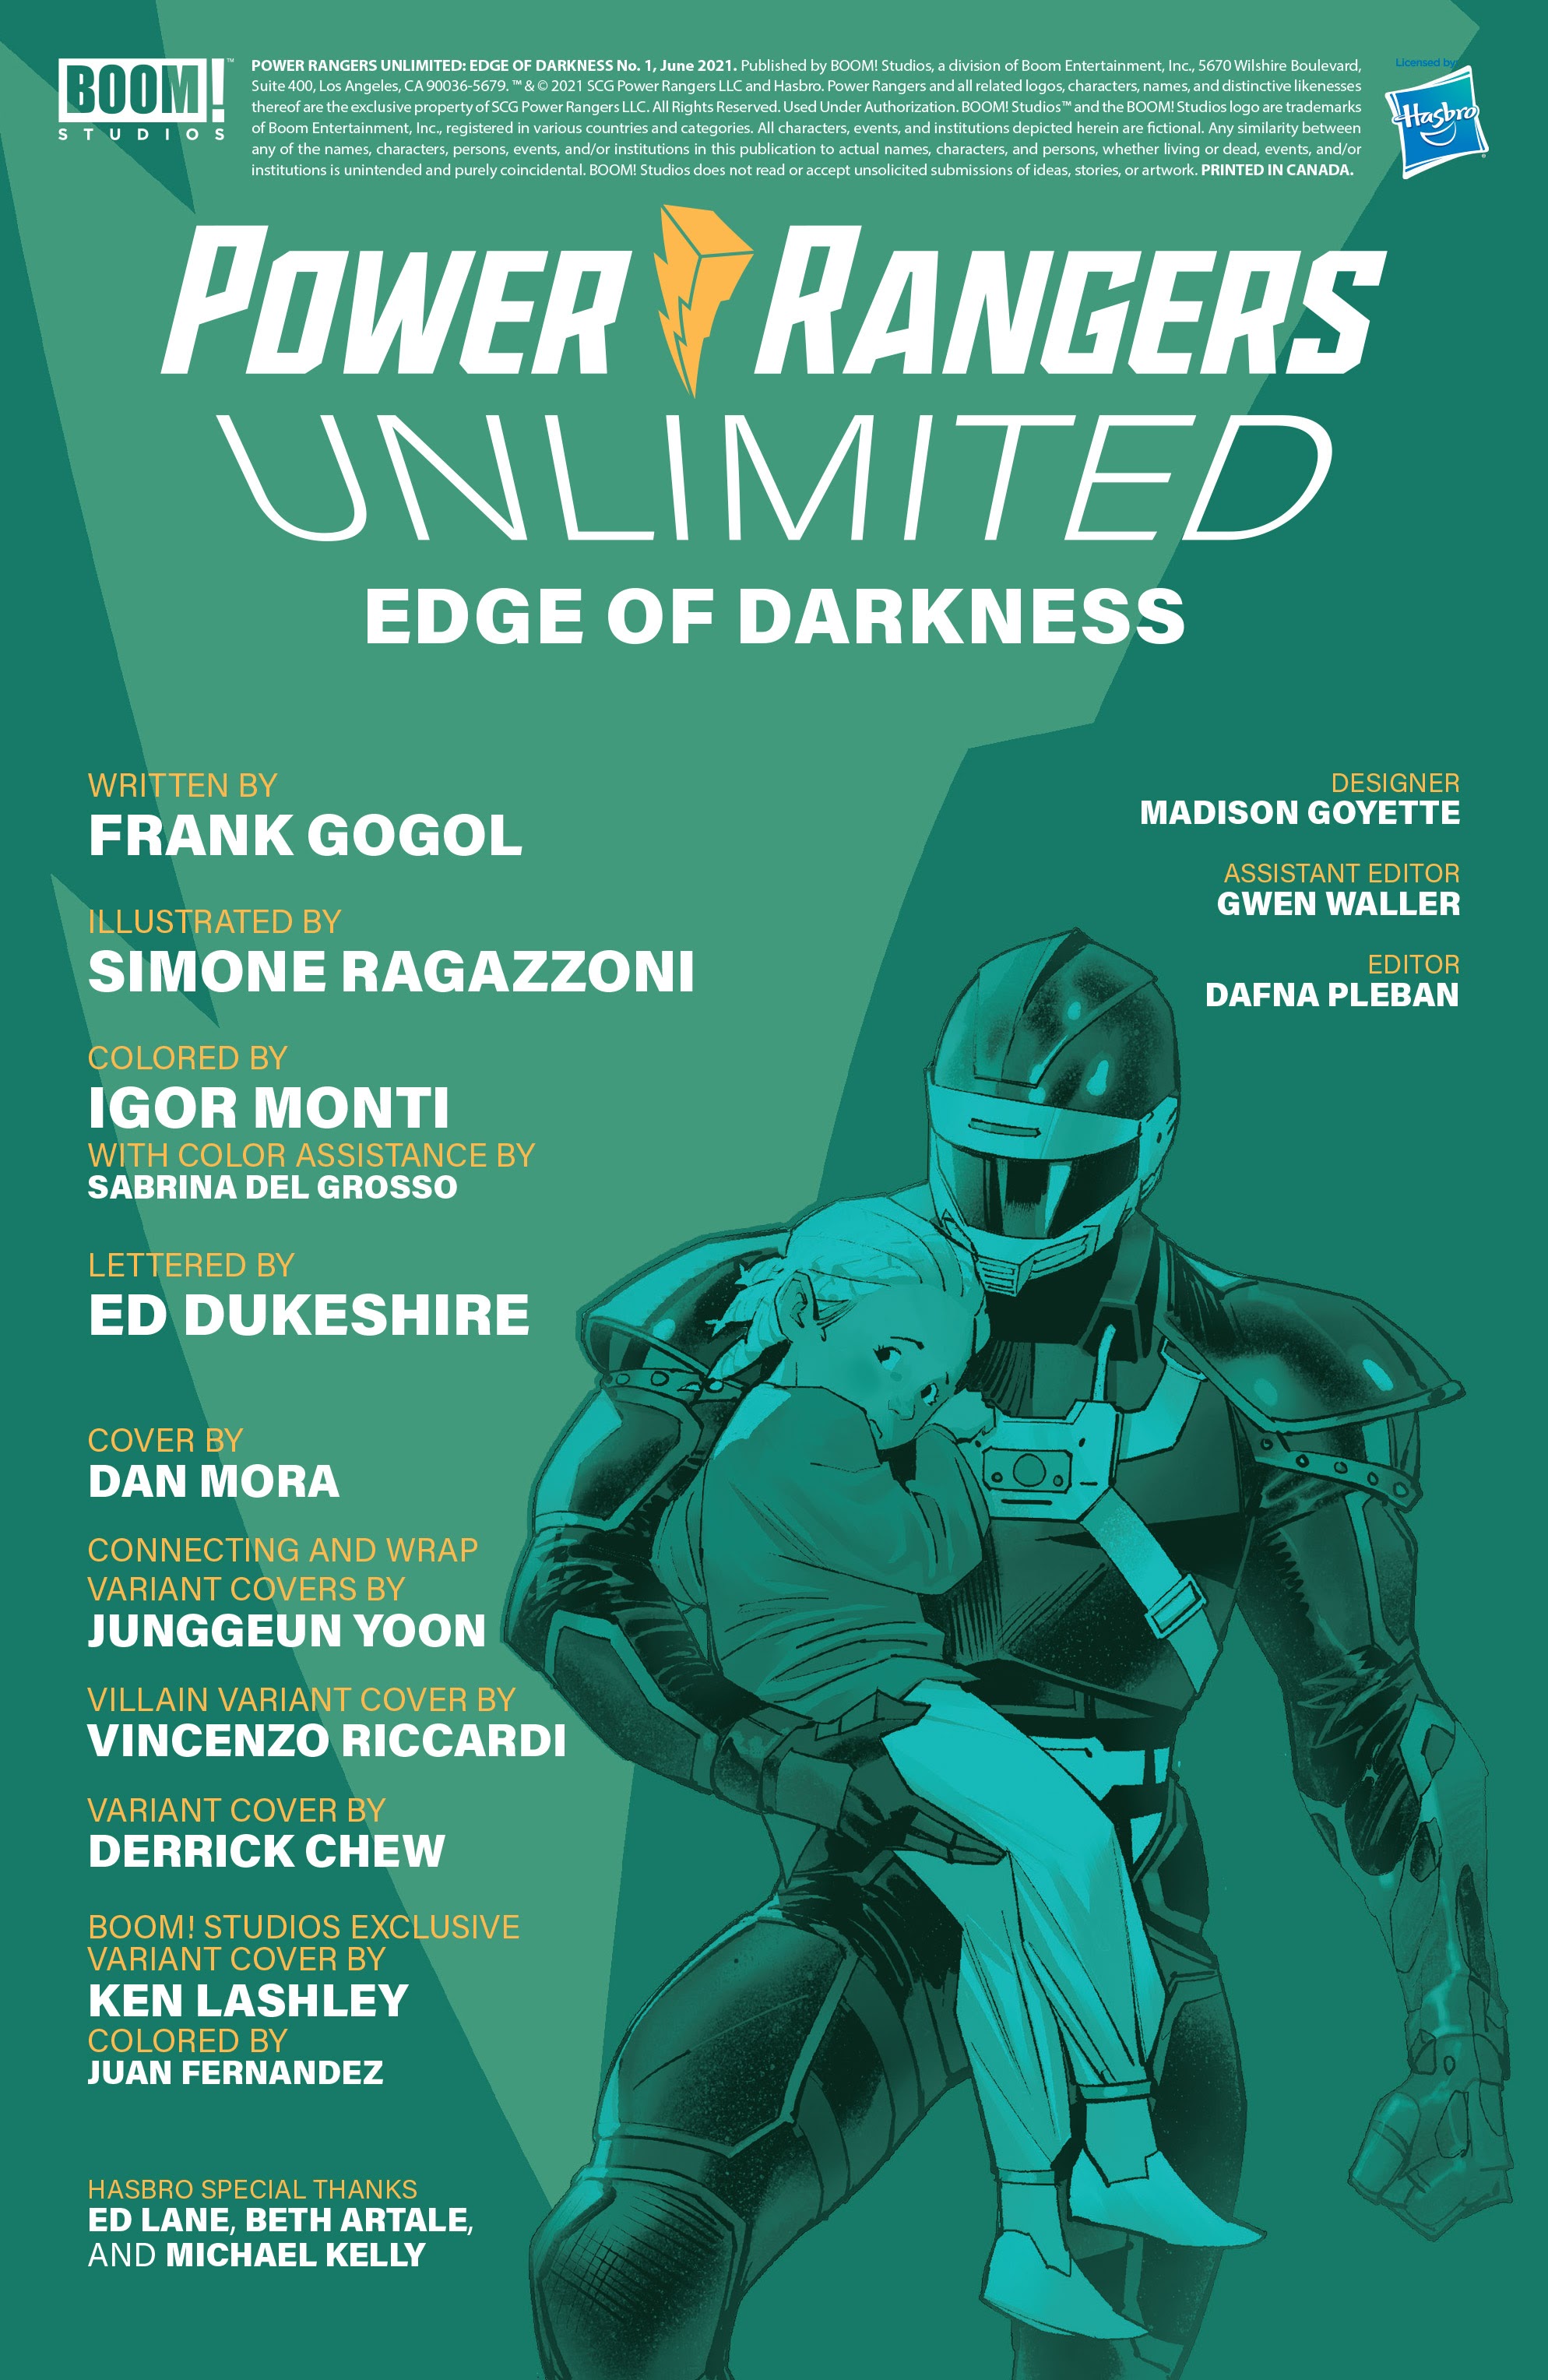 Read online Power Rangers Unlimited comic -  Issue # Edge of Darkness - 2